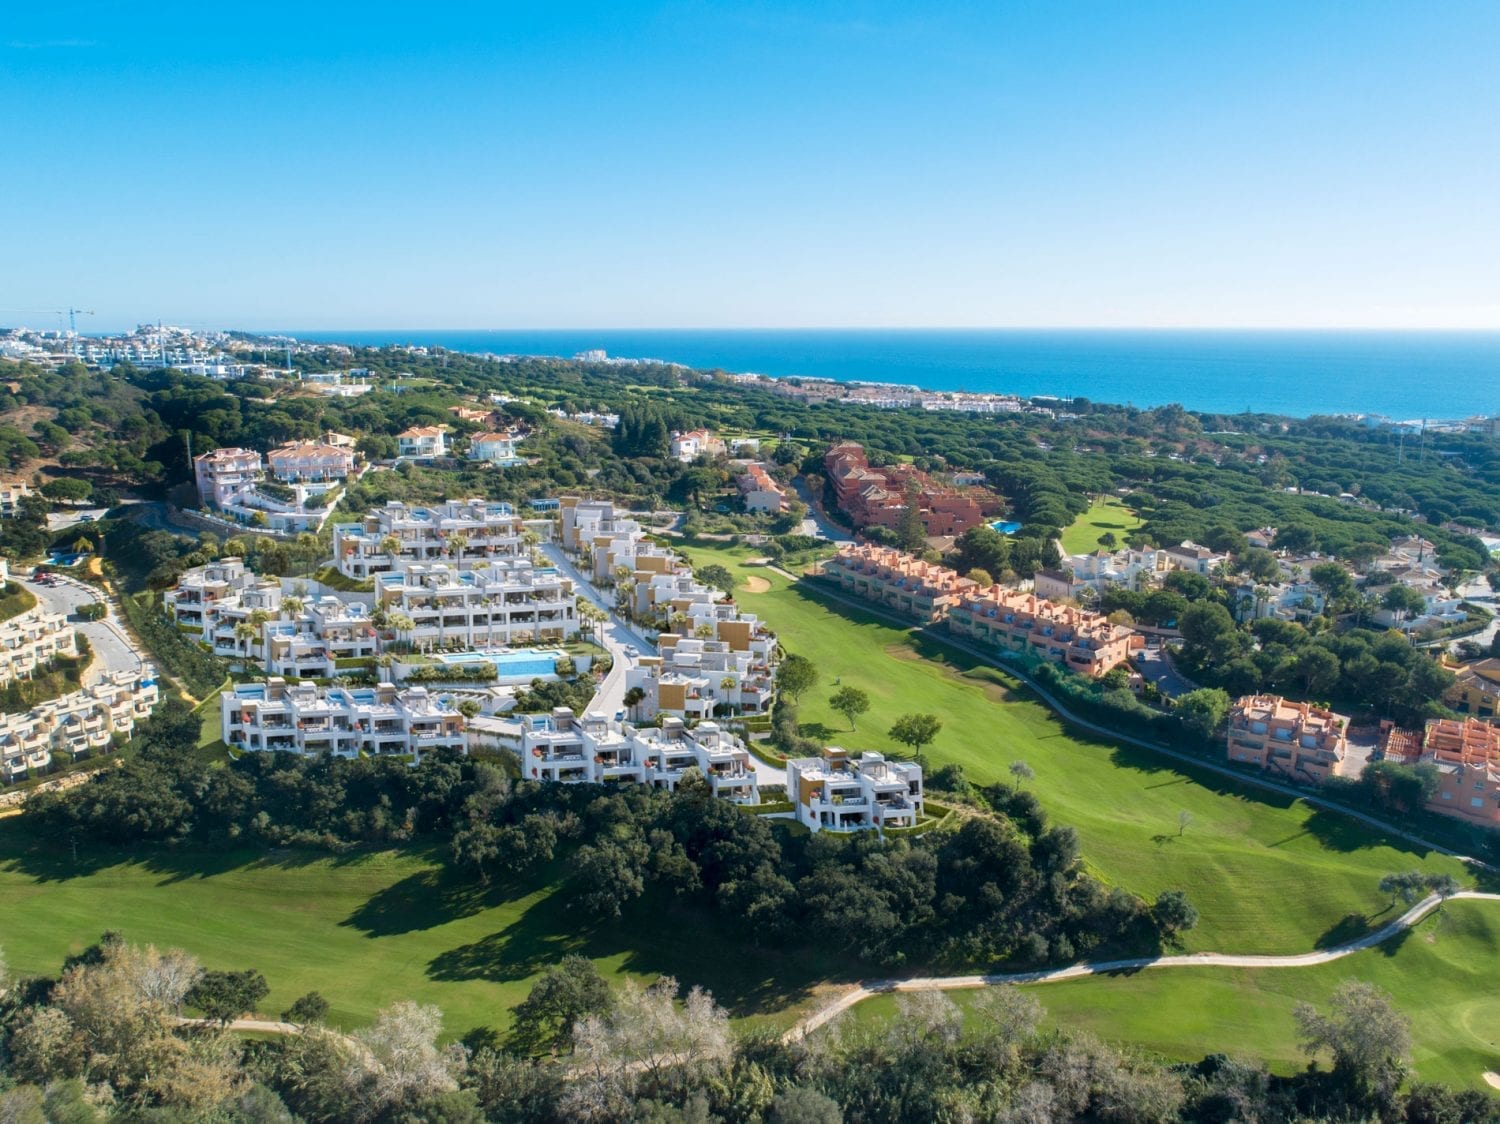 Artola Homes has an idyllic location, on the front line of the Cabopino Golf Course in Marbella. In addition, you have more than 70 golf courses along the Costa del Sol, with a magnificent structure and ideal climate, plus international schools, health centres and shopping malls